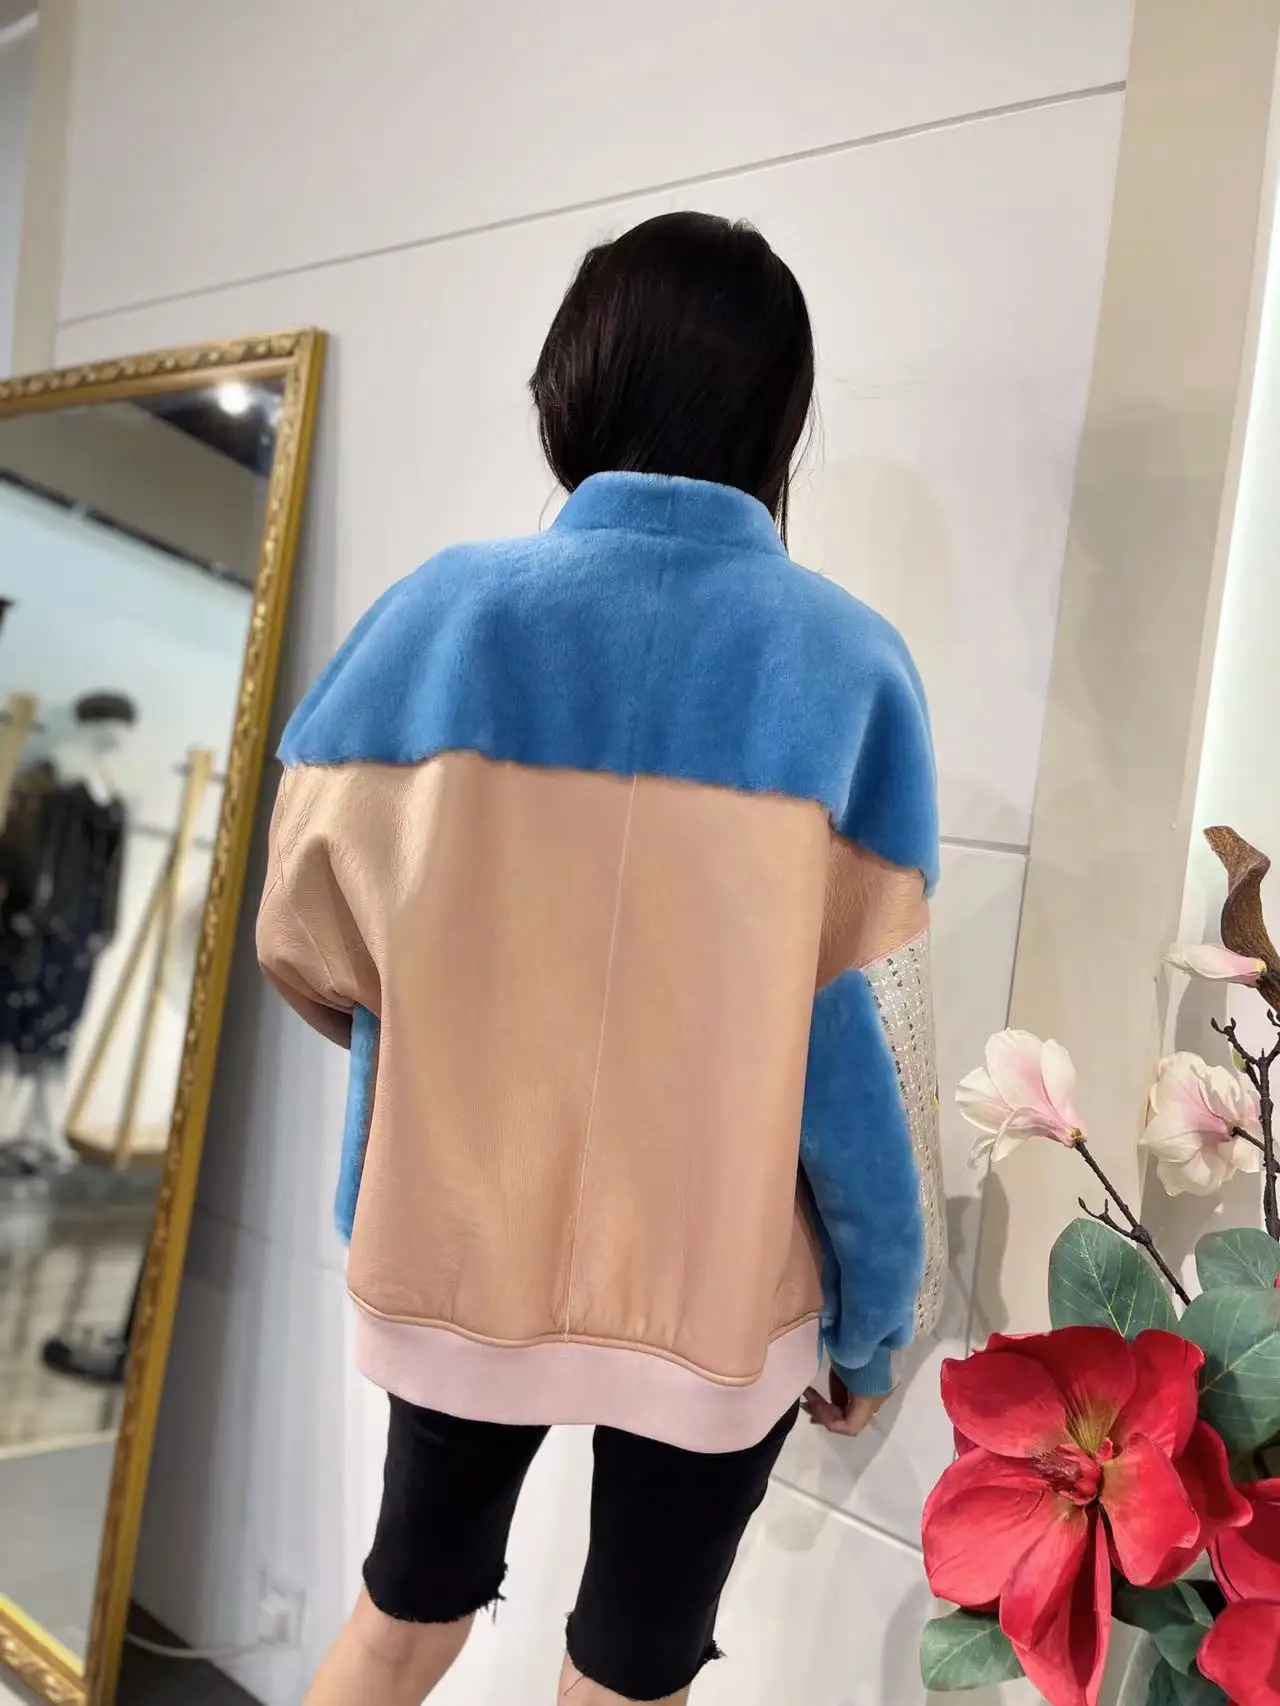 2022 Women's Winter Coat A Baseball Uniform Made Of Fur Casual And Fashionable Cool To Wear enlarge